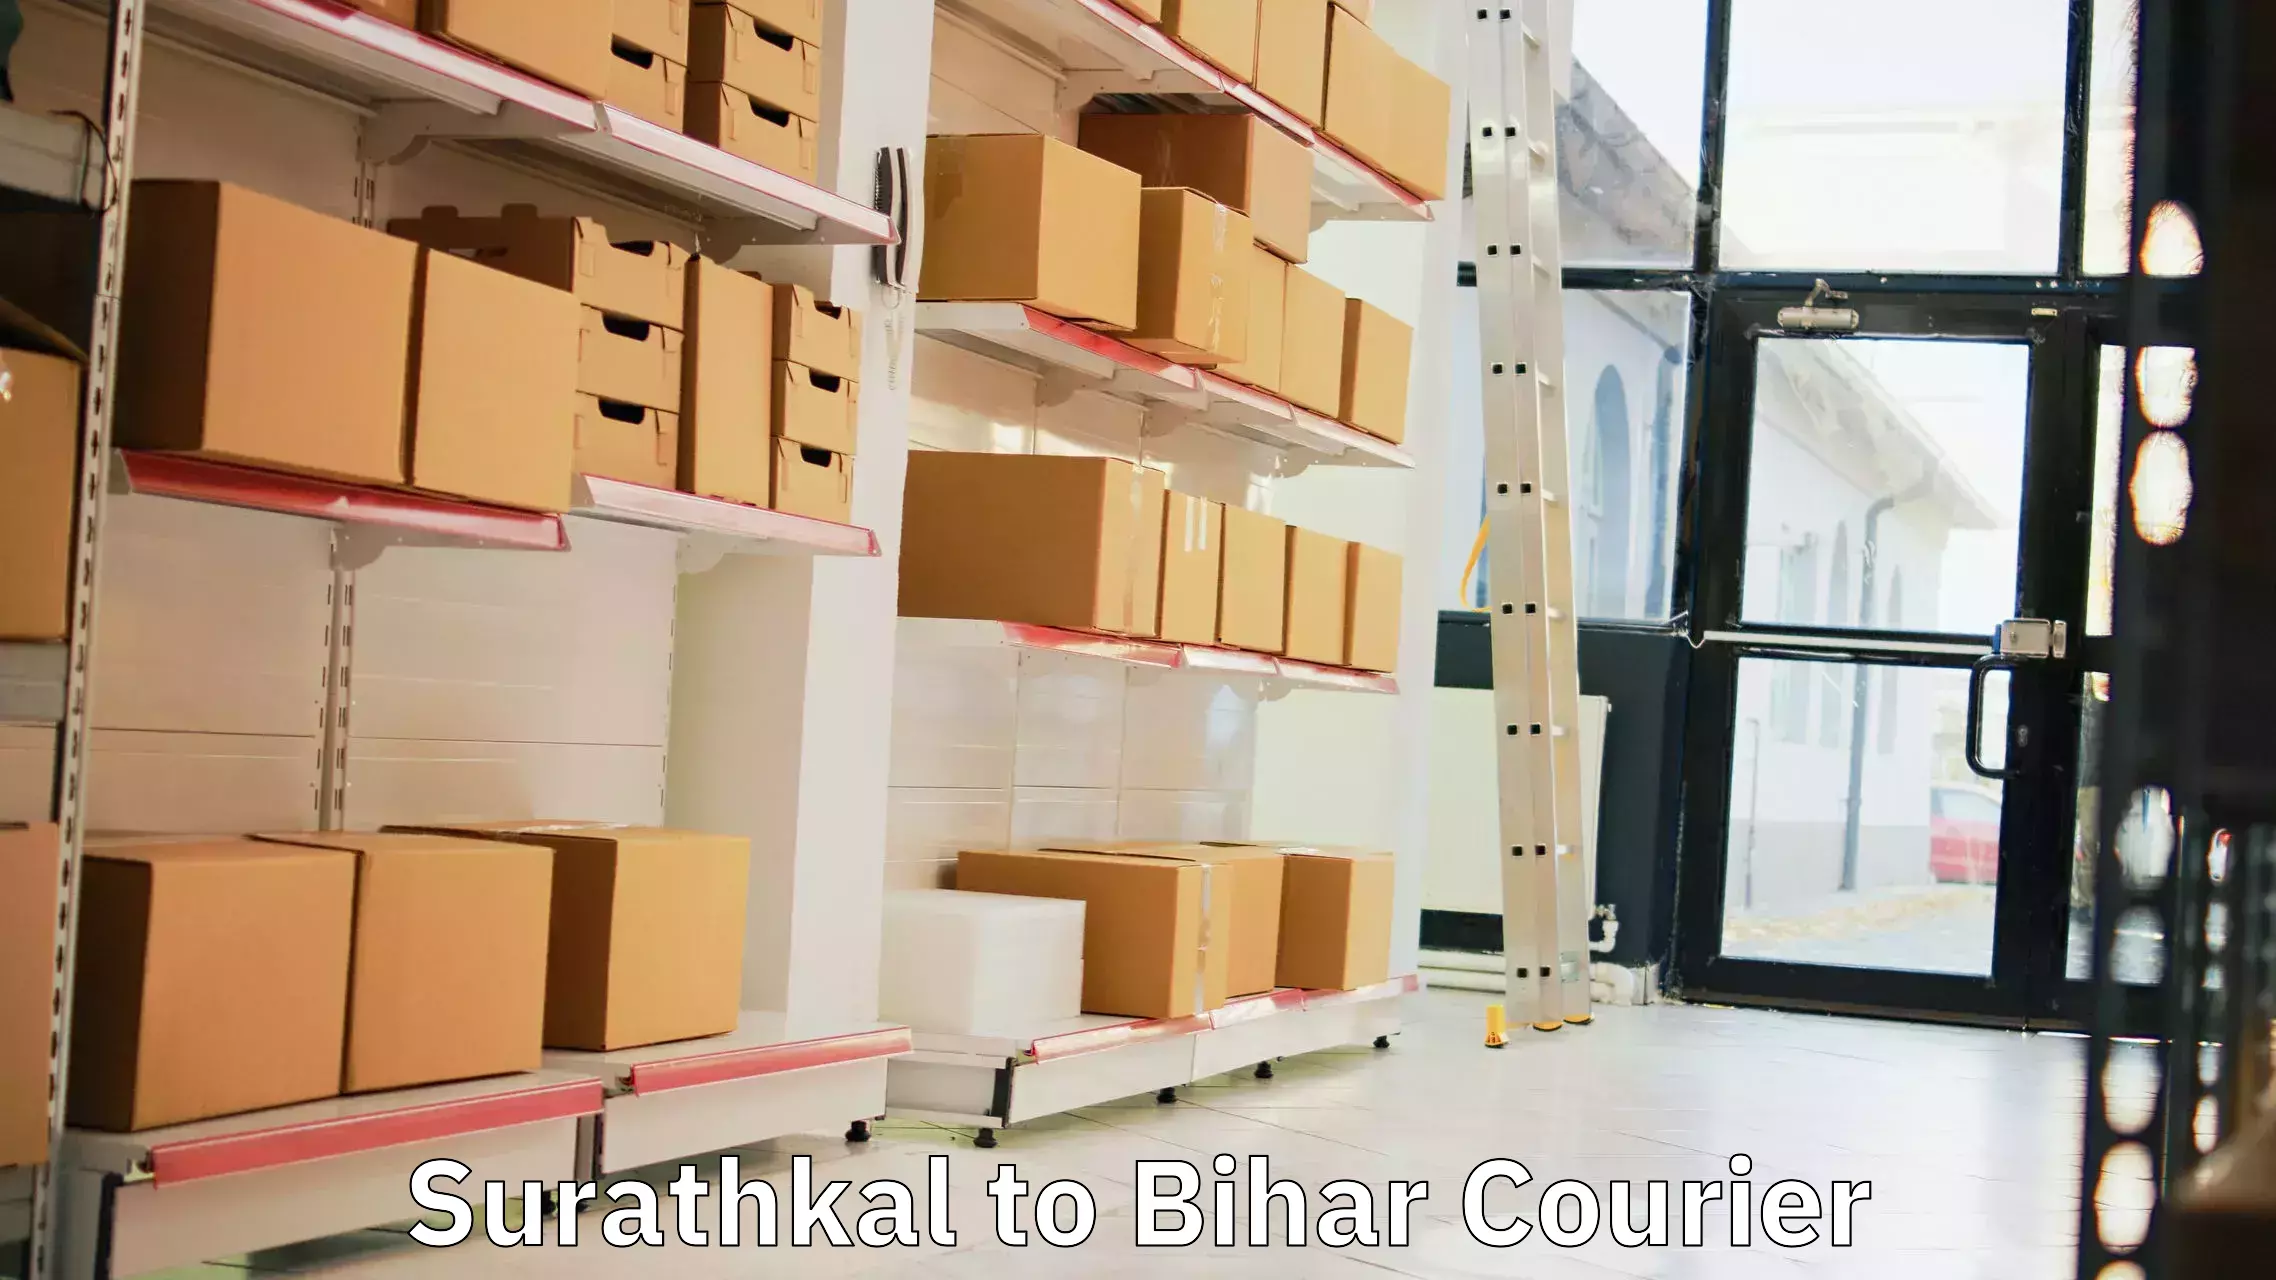 Courier service booking in Surathkal to Fatwah